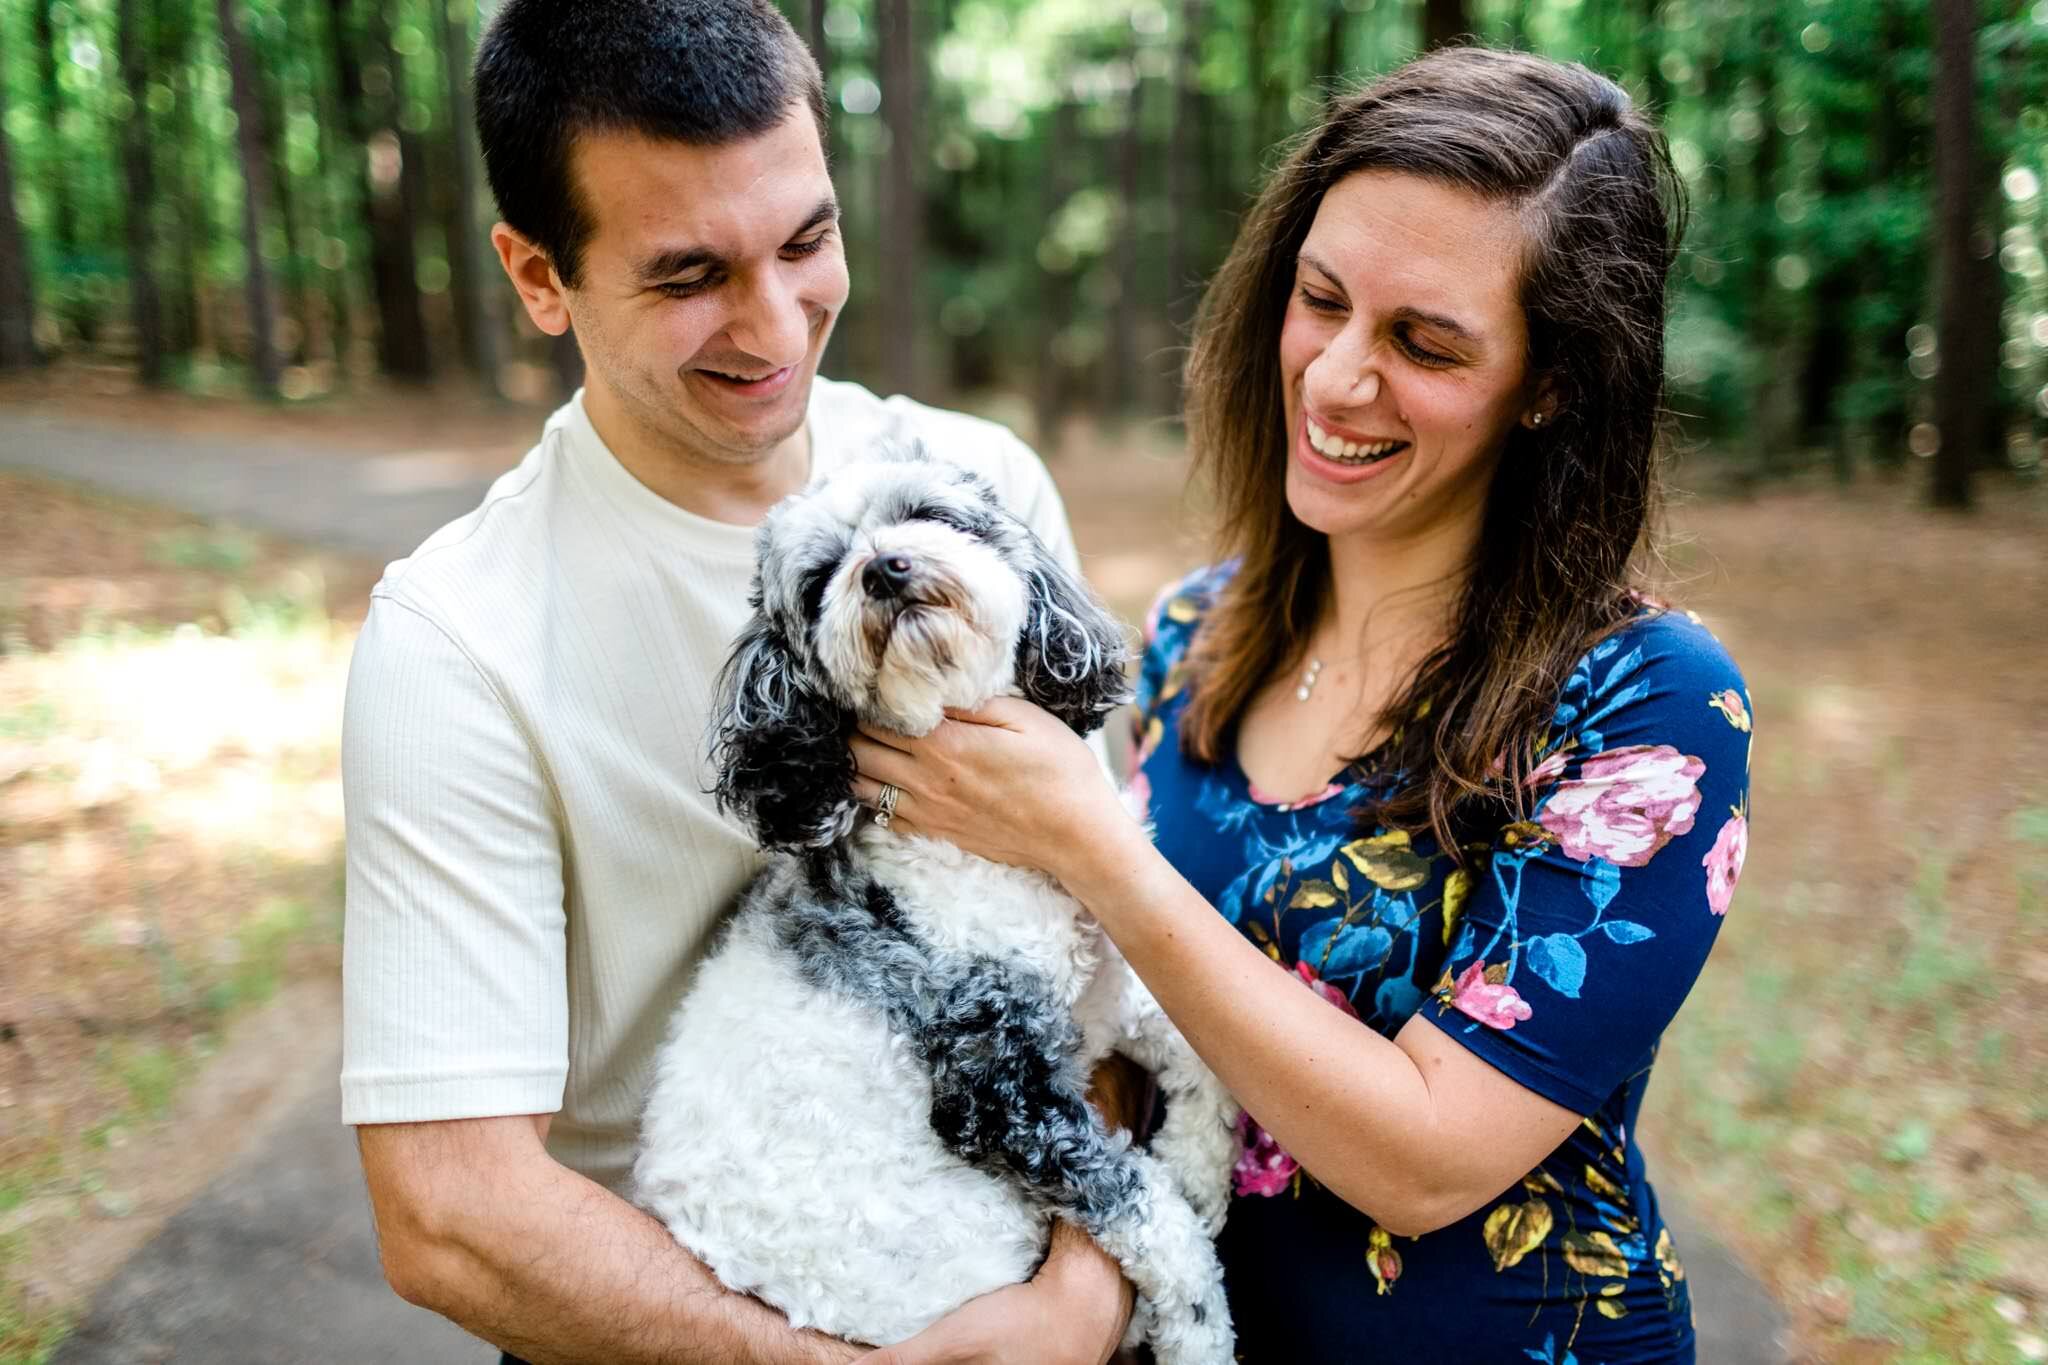 Raleigh Maternity Photographer | By G. Lin Photography | Umstead Park | Couple laughing and smiling with dog